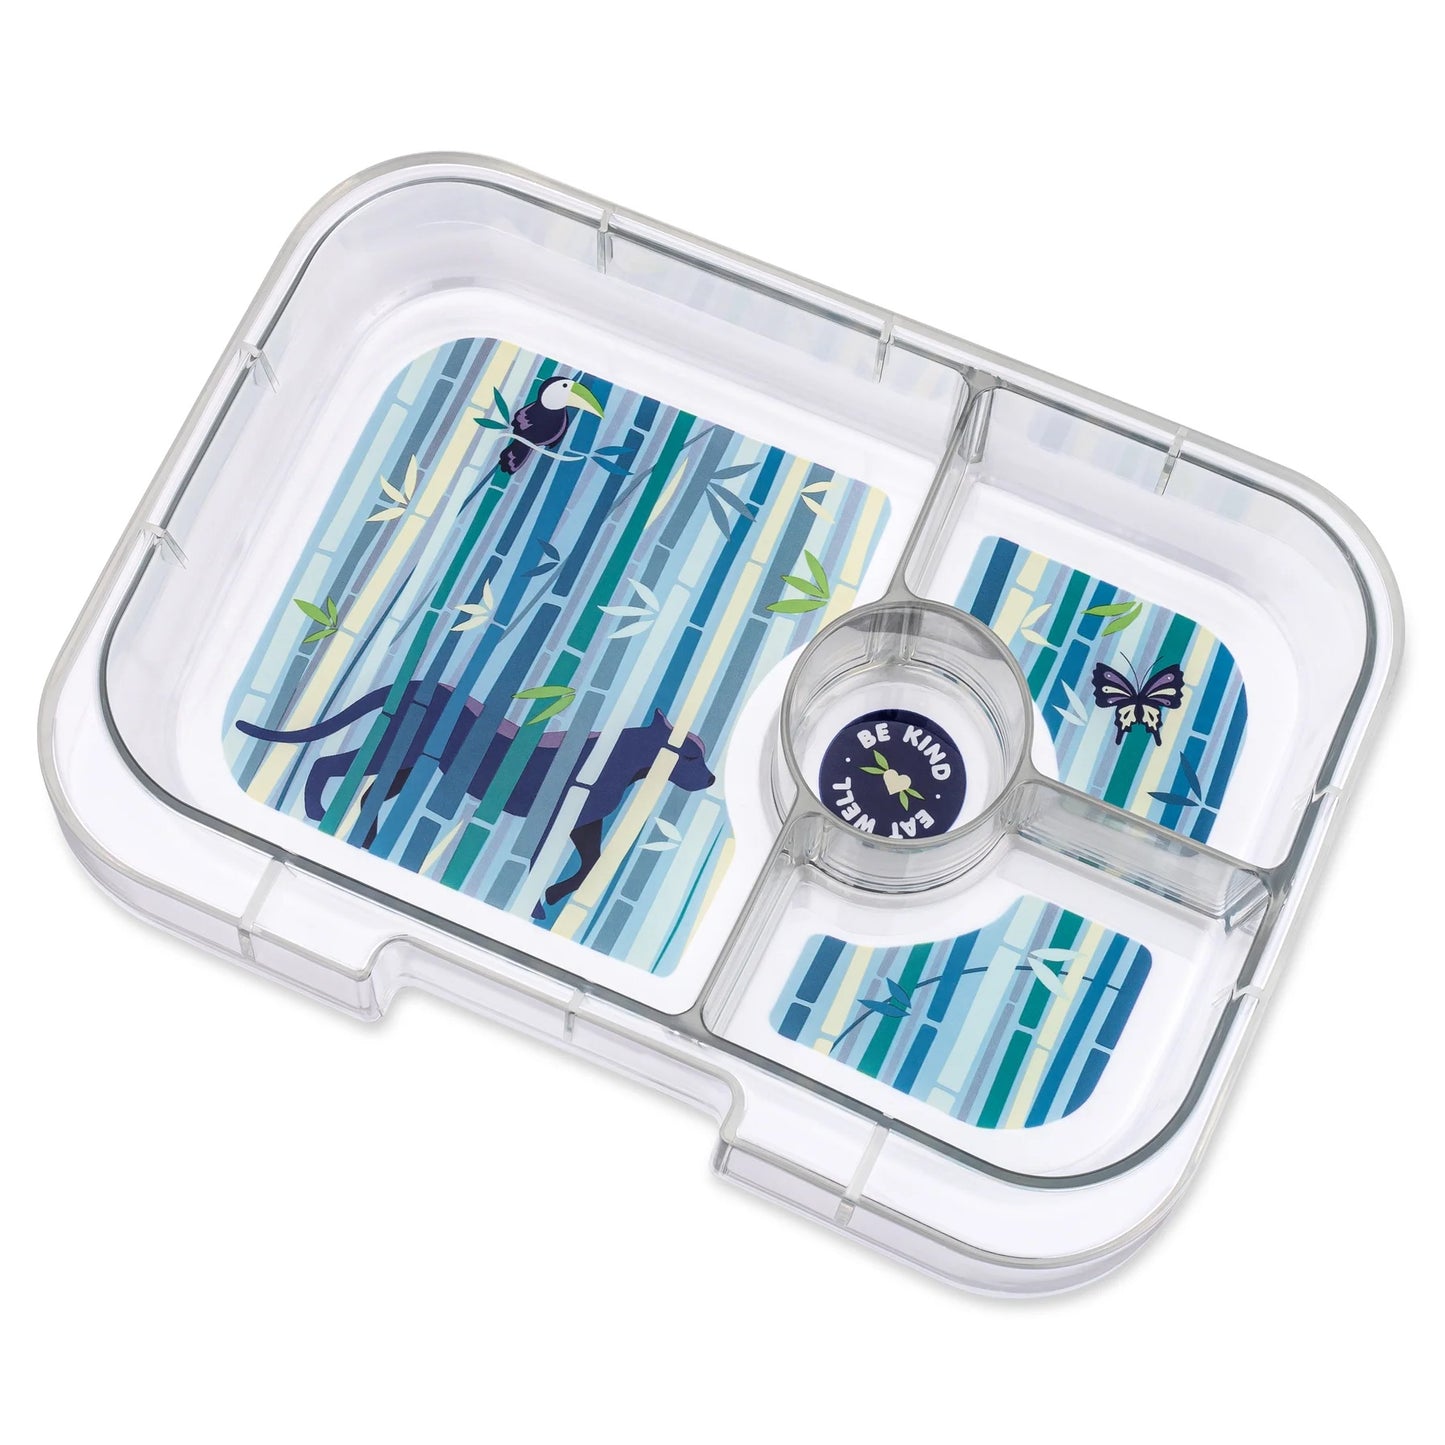 Yumbox - Bento Box | 4 Compartments | Panther | Hazy Blue